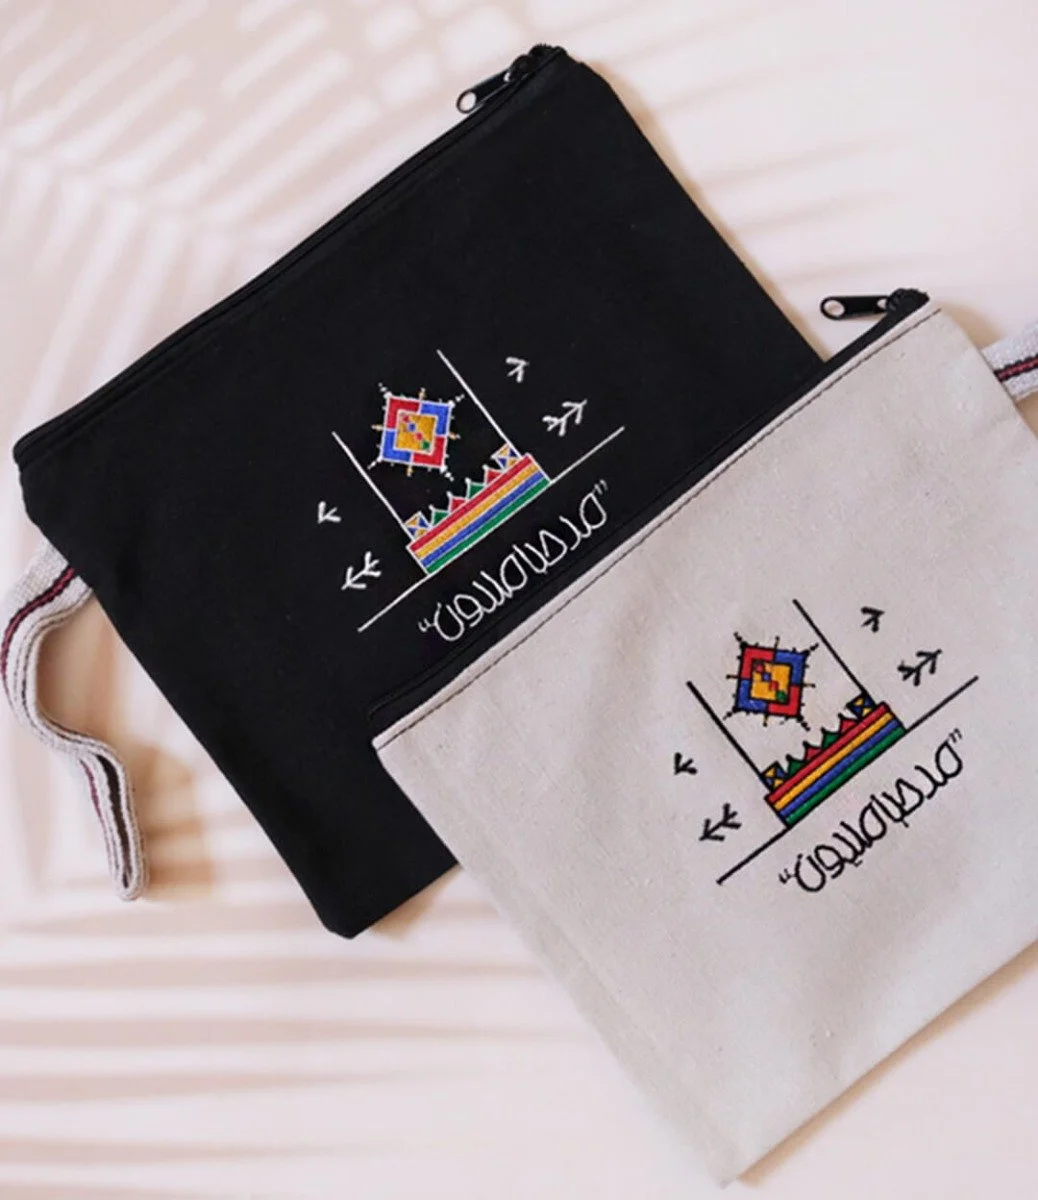 Pouch Bag with text "Marhaba Million"